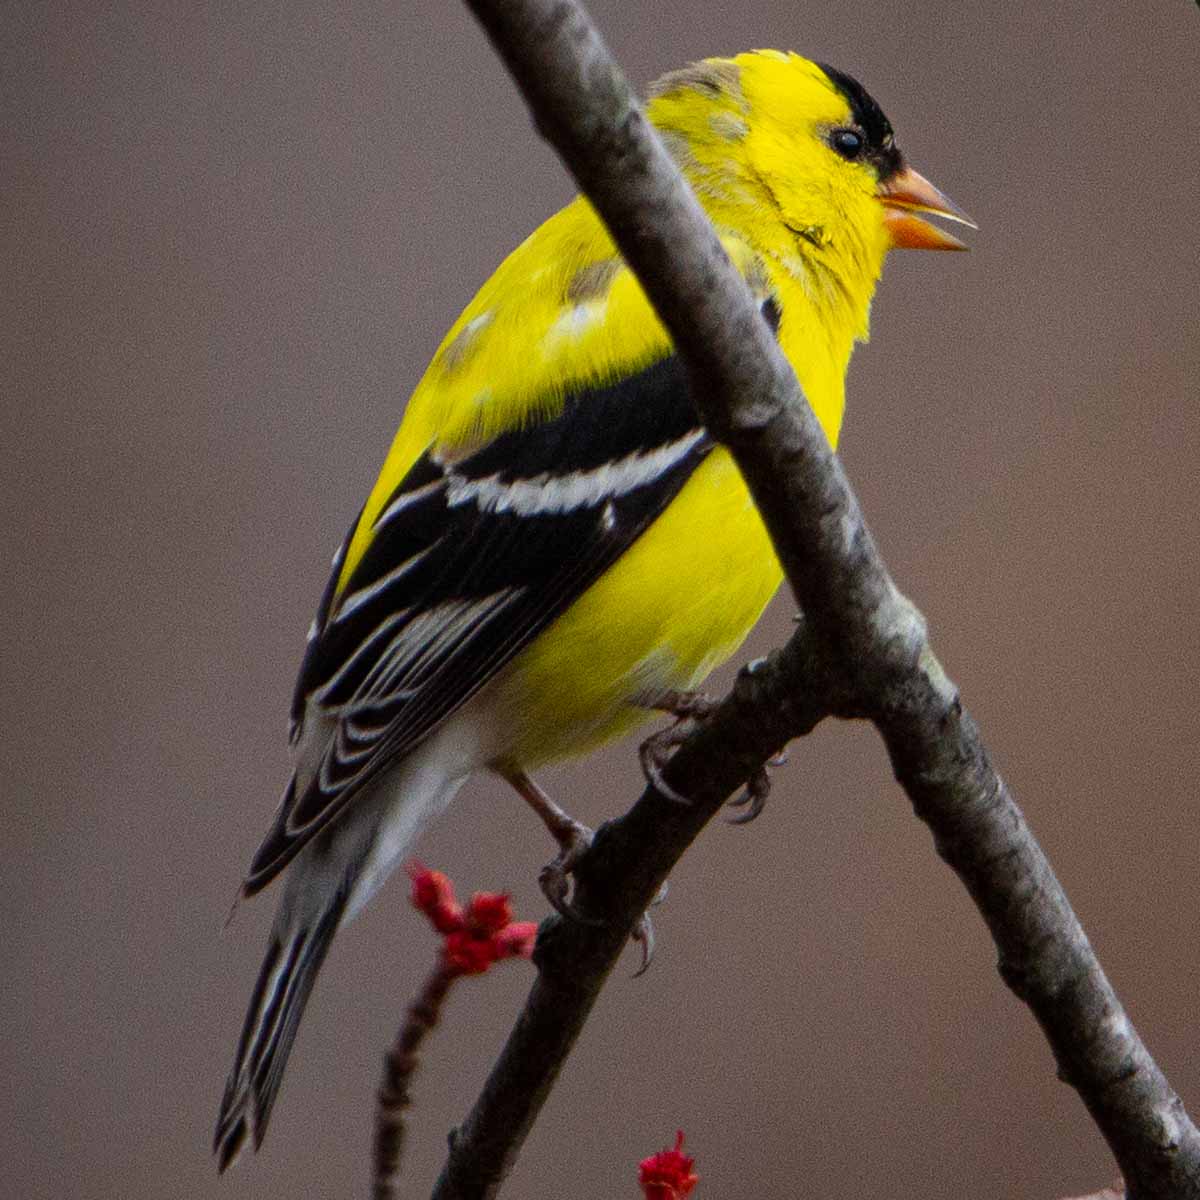 The image depicts a vibrant American goldfinch perched on a branch. The goldfinch has a bright yellow body with black wings and a black cap on its head. Its small, conical beak and alert expression give it a lively, energetic appearance. The goldfinch is surrounded by lush, green foliage, suggesting a natural, outdoor setting. American goldfinches are known for their cheerful, bouncing flight and distinctive call notes, making them a beloved backyard bird species in North America.